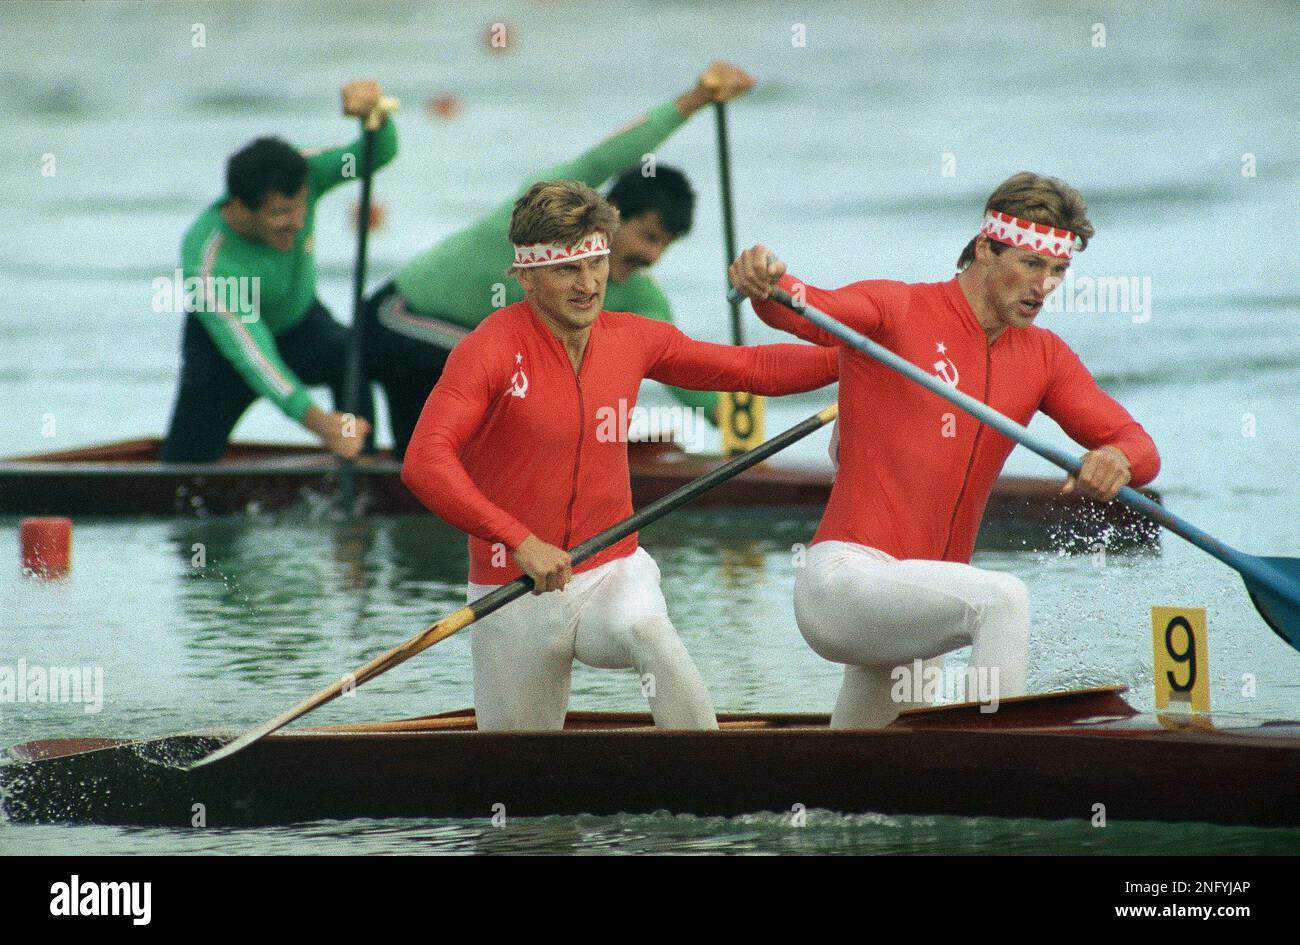 https://c8.alamy.com/comp/2NFYJAP/victor-reneiski-and-nikolai-jouravski-of-the-soviet-union-paddle-their-way-to-the-finish-line-during-the-mens-olympic-canoeing-canadian-pairs-500-meter-final-in-seoul-sept-30-1988-the-soviets-captured-the-gold-medal-by-winning-the-race-in-1-minute-4177-seconds-ap-photorudi-blaha-2NFYJAP.jpg